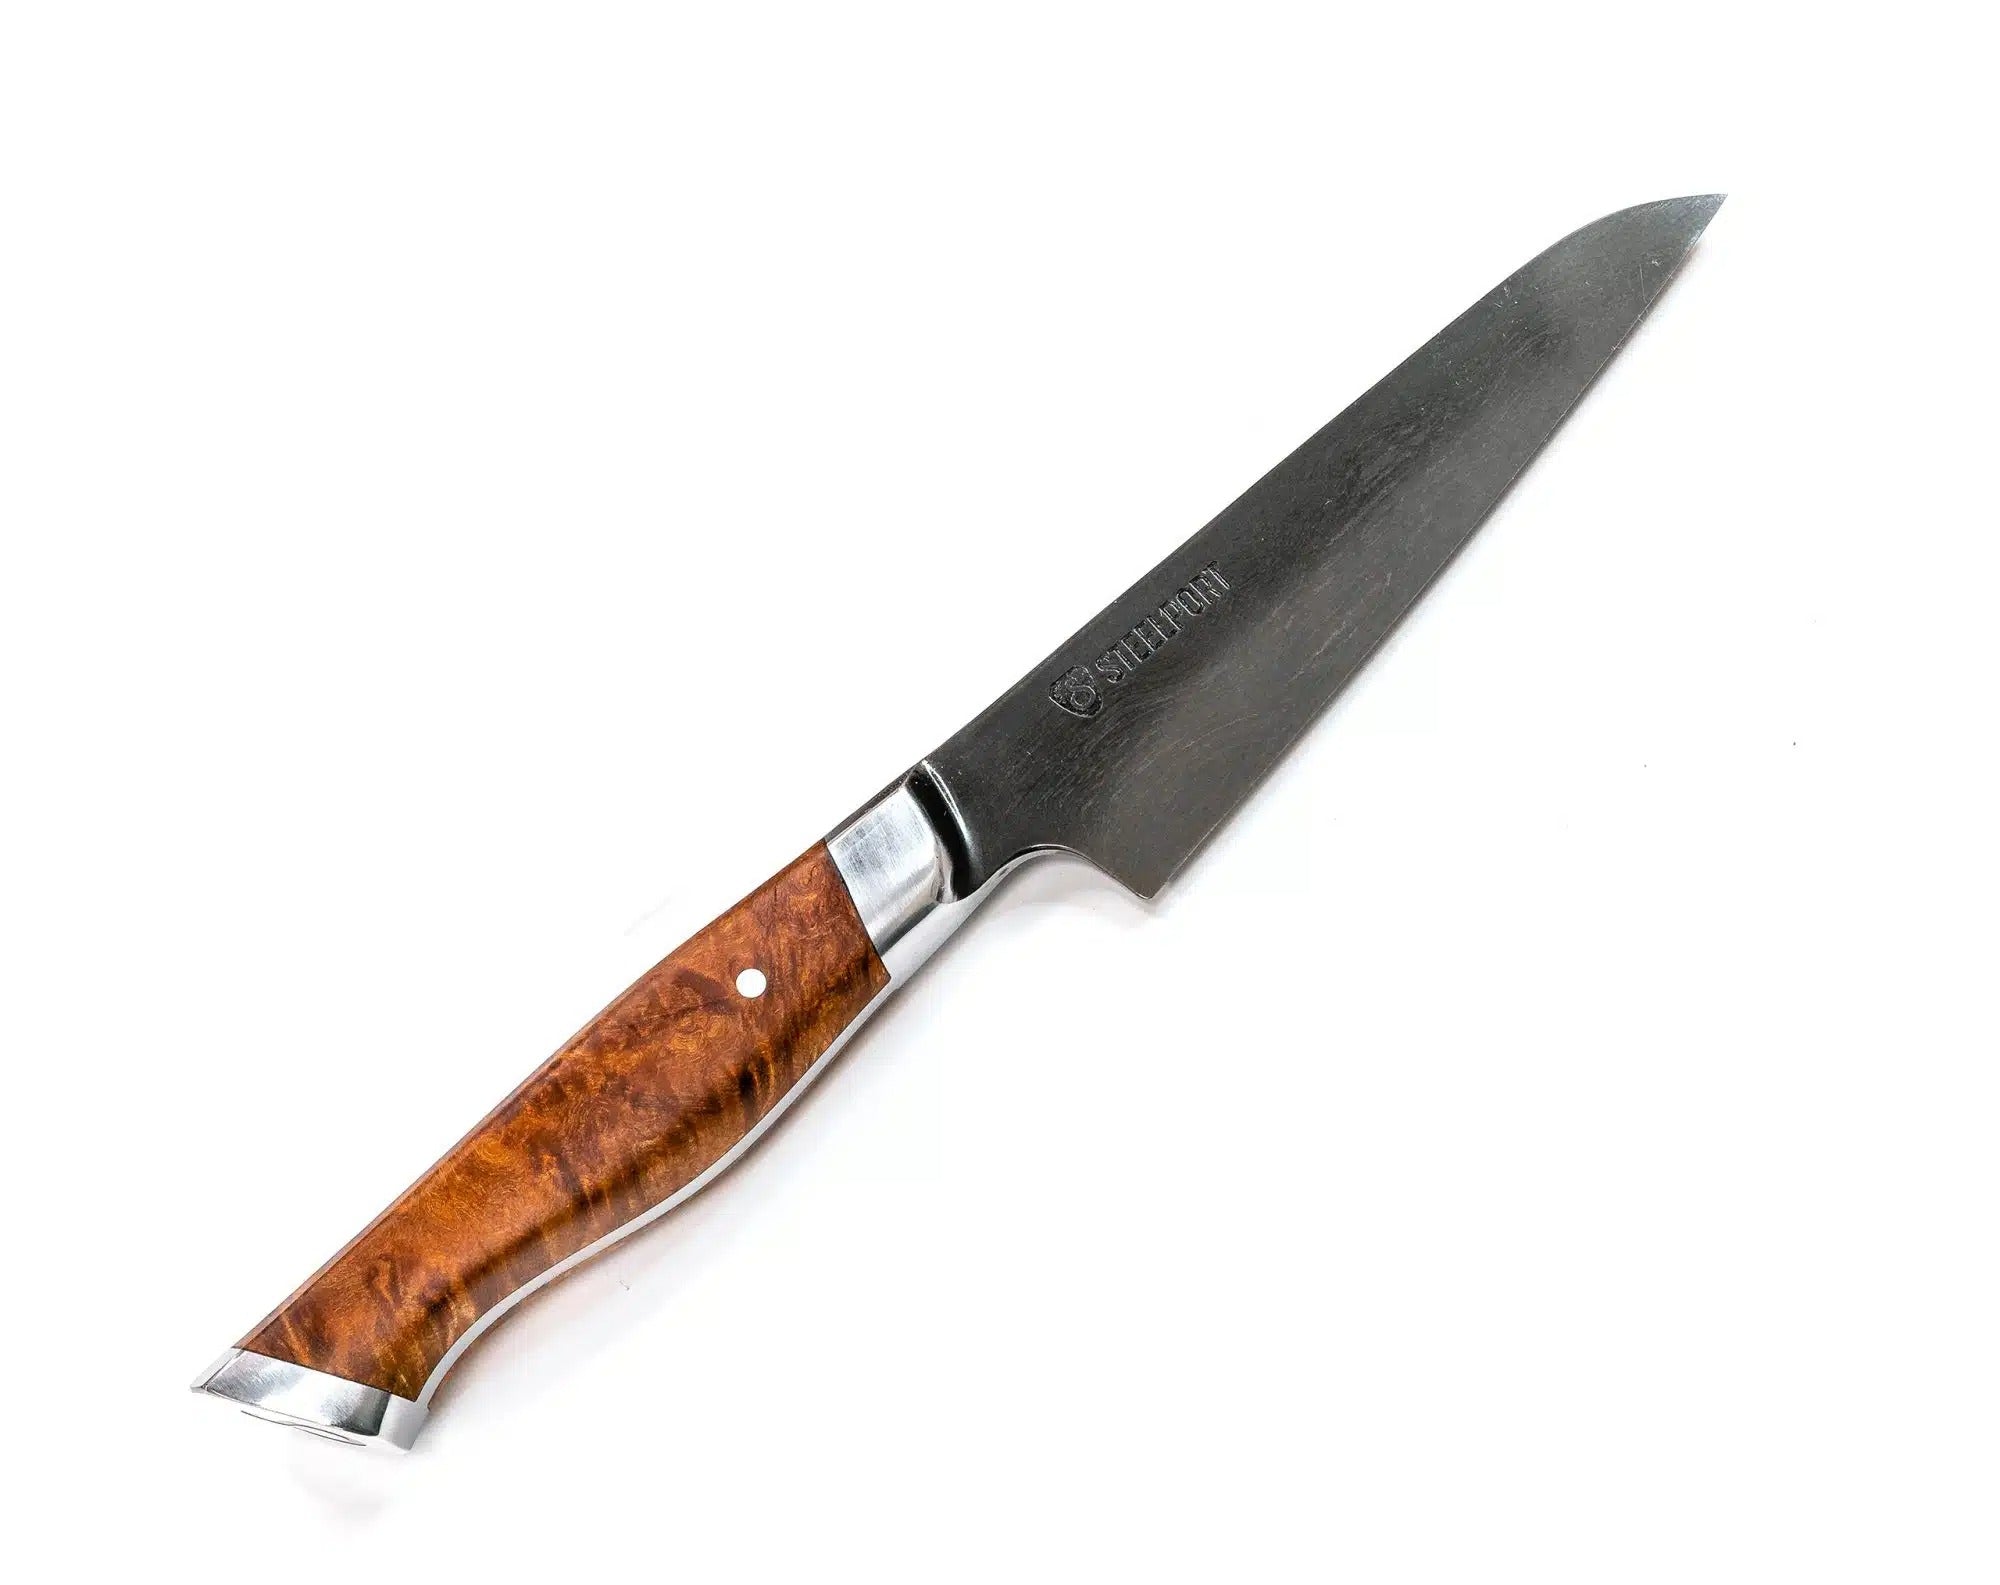 3pc Set Damascus Chef Knives W/ Stabilized Wood Handle Burl Unique Chef  Knife Best Kitchen Knife, Chef Gift, Gift for Him 